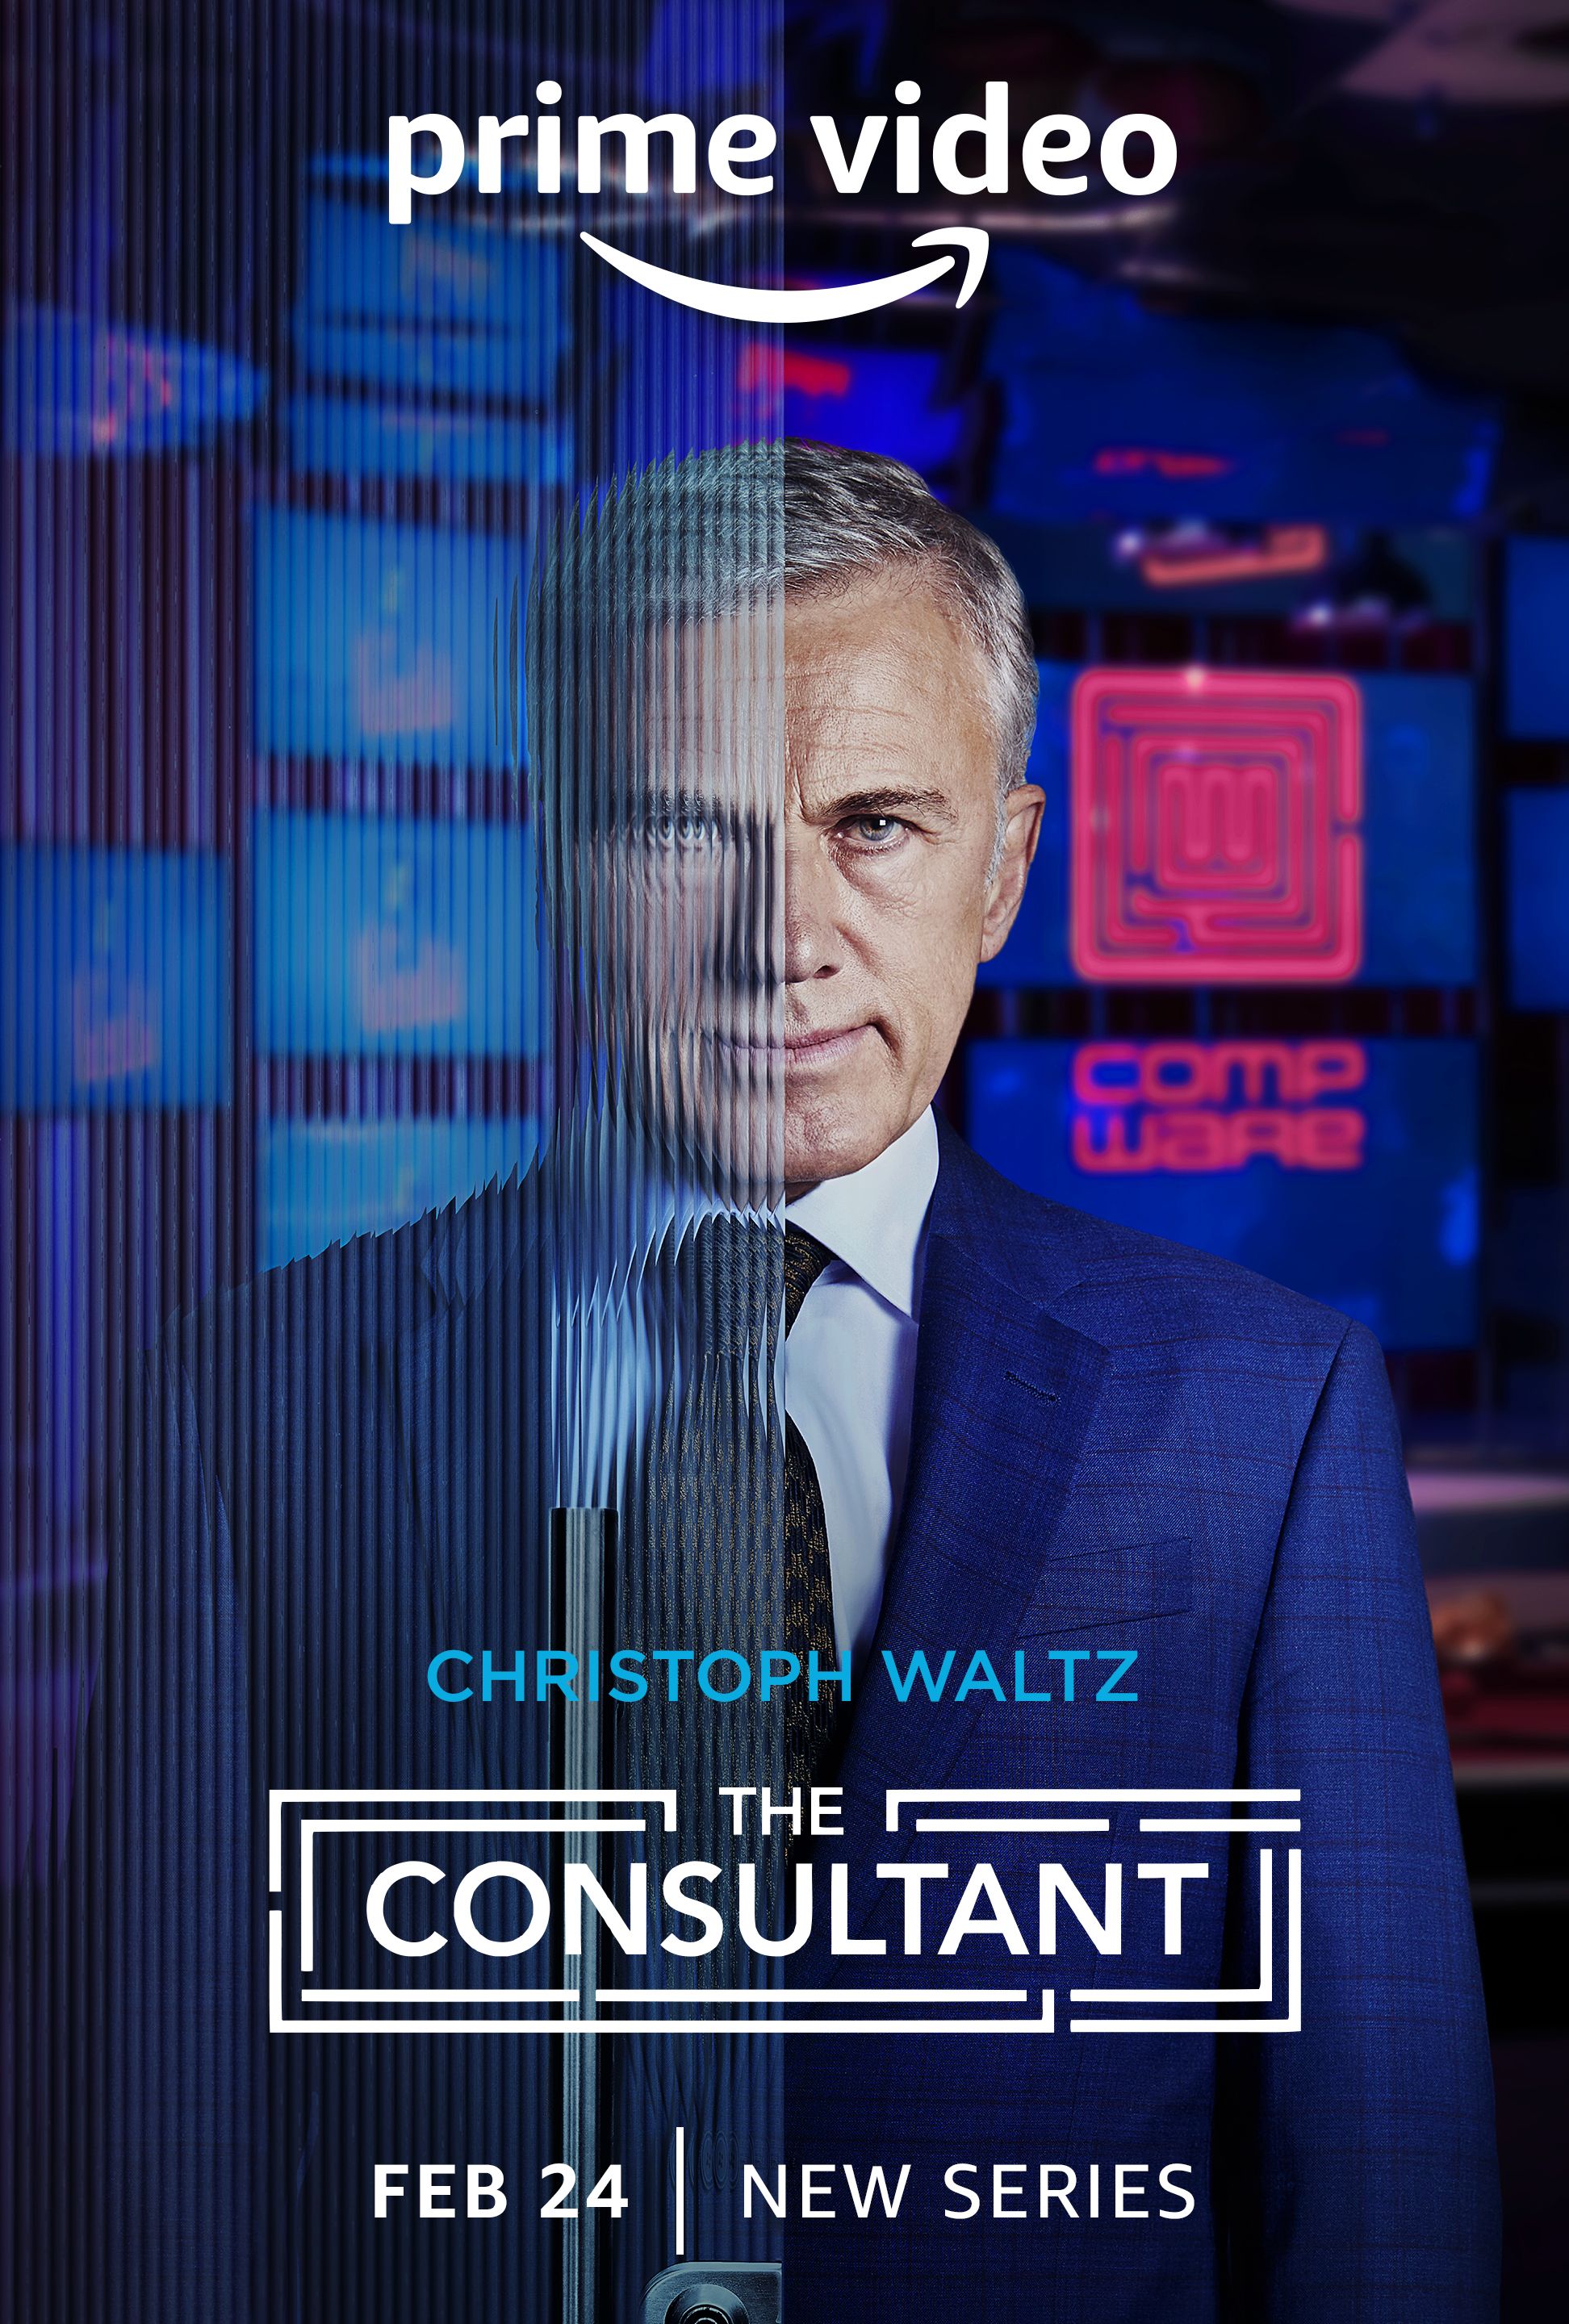 The Consultant Prime Video Poster